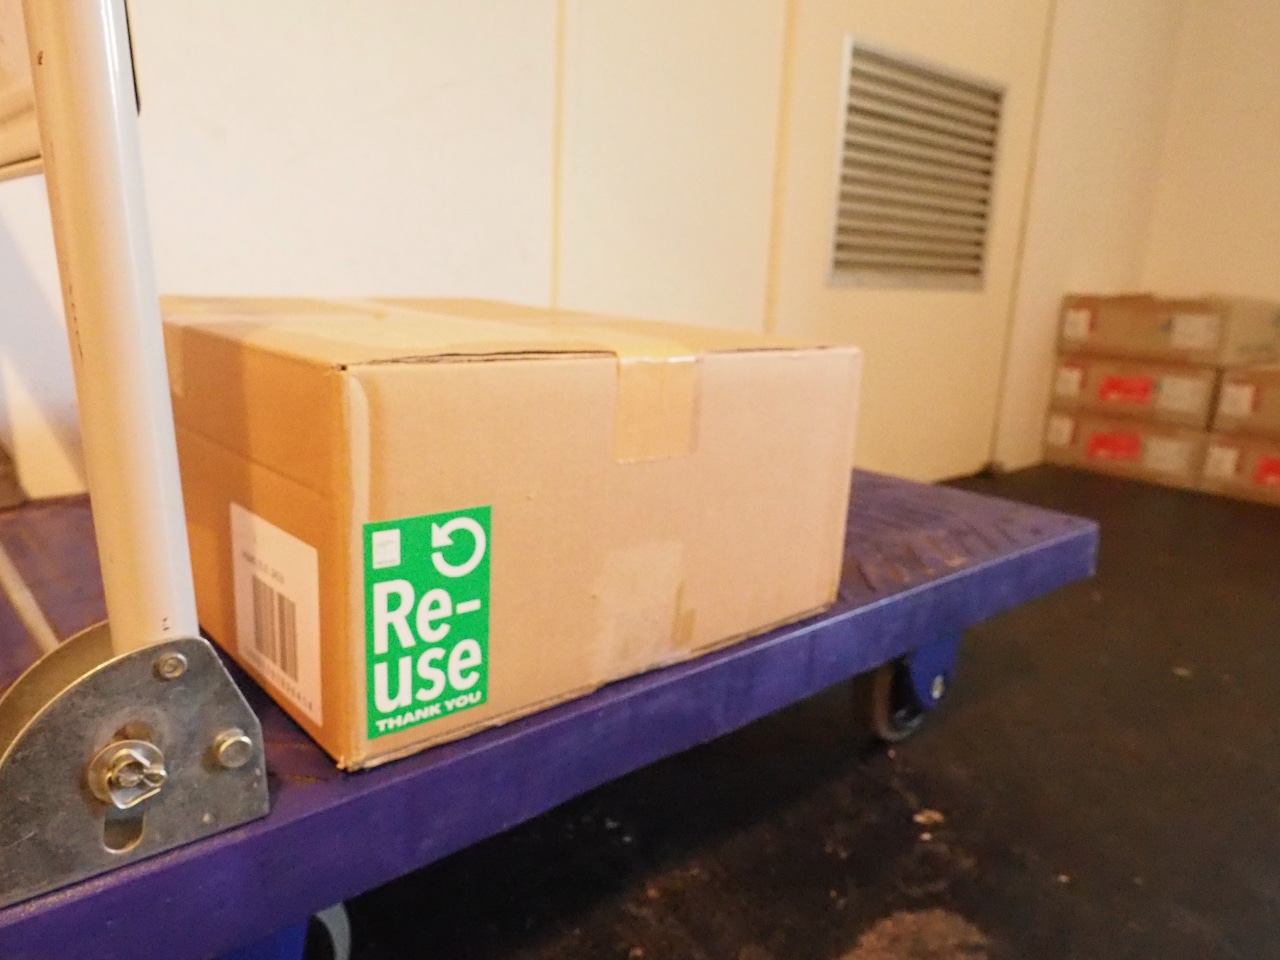 『Re-use Package』ステッカー（大容量５００枚入）